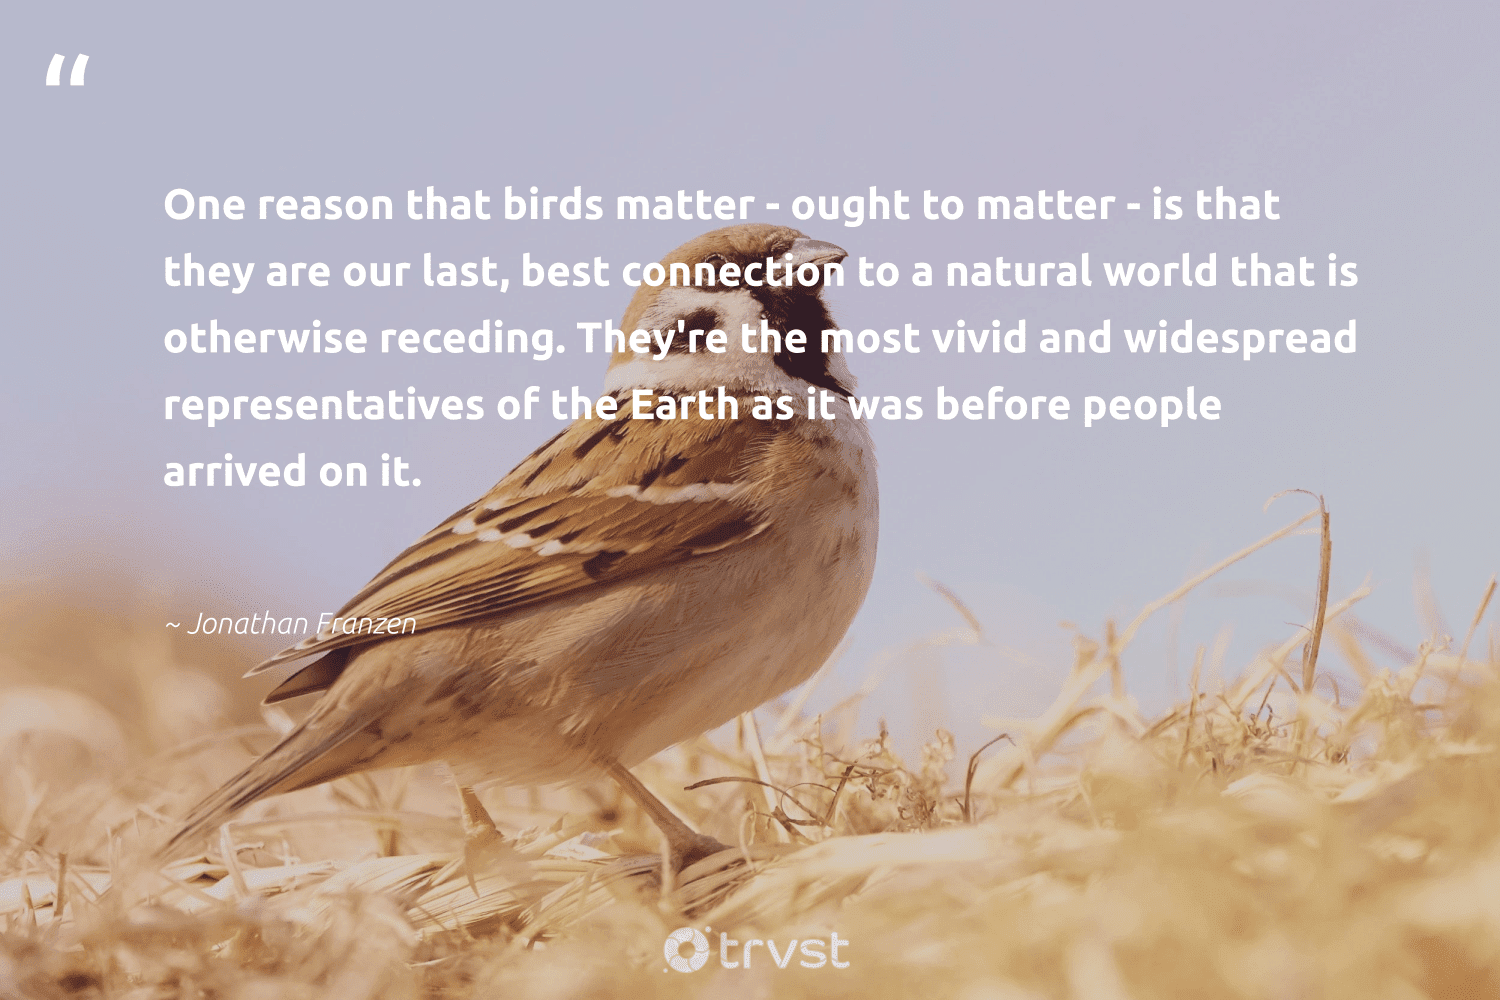 110 Bird Quotes and Sayings About Birds to Inspire & Motivate